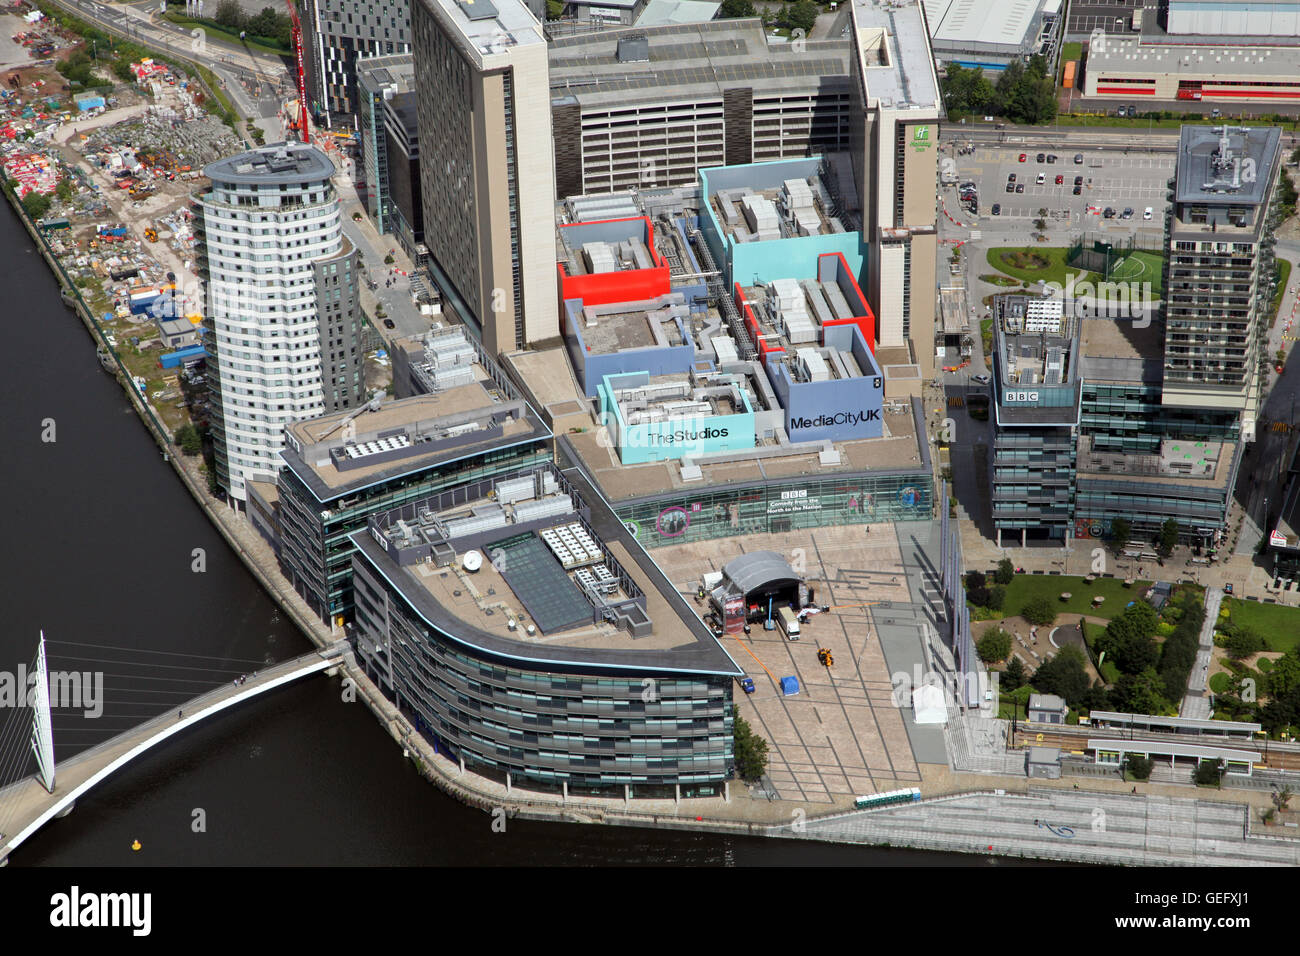 aerial view of the BBC studios in MediaCity, Salford Quays, Manchester, UK Stock Photo